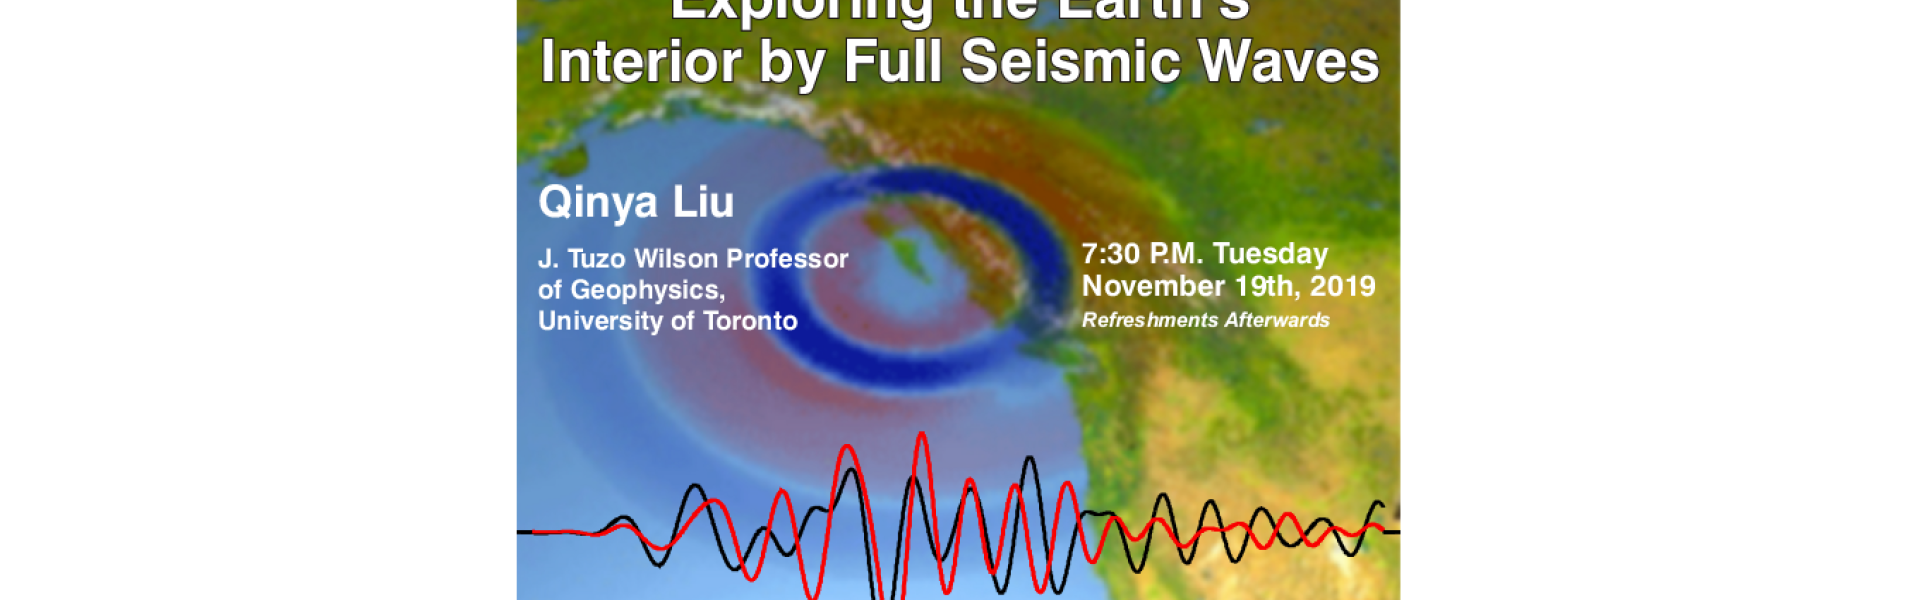 Exploring the Earth's Interior by Full Seismic Waves